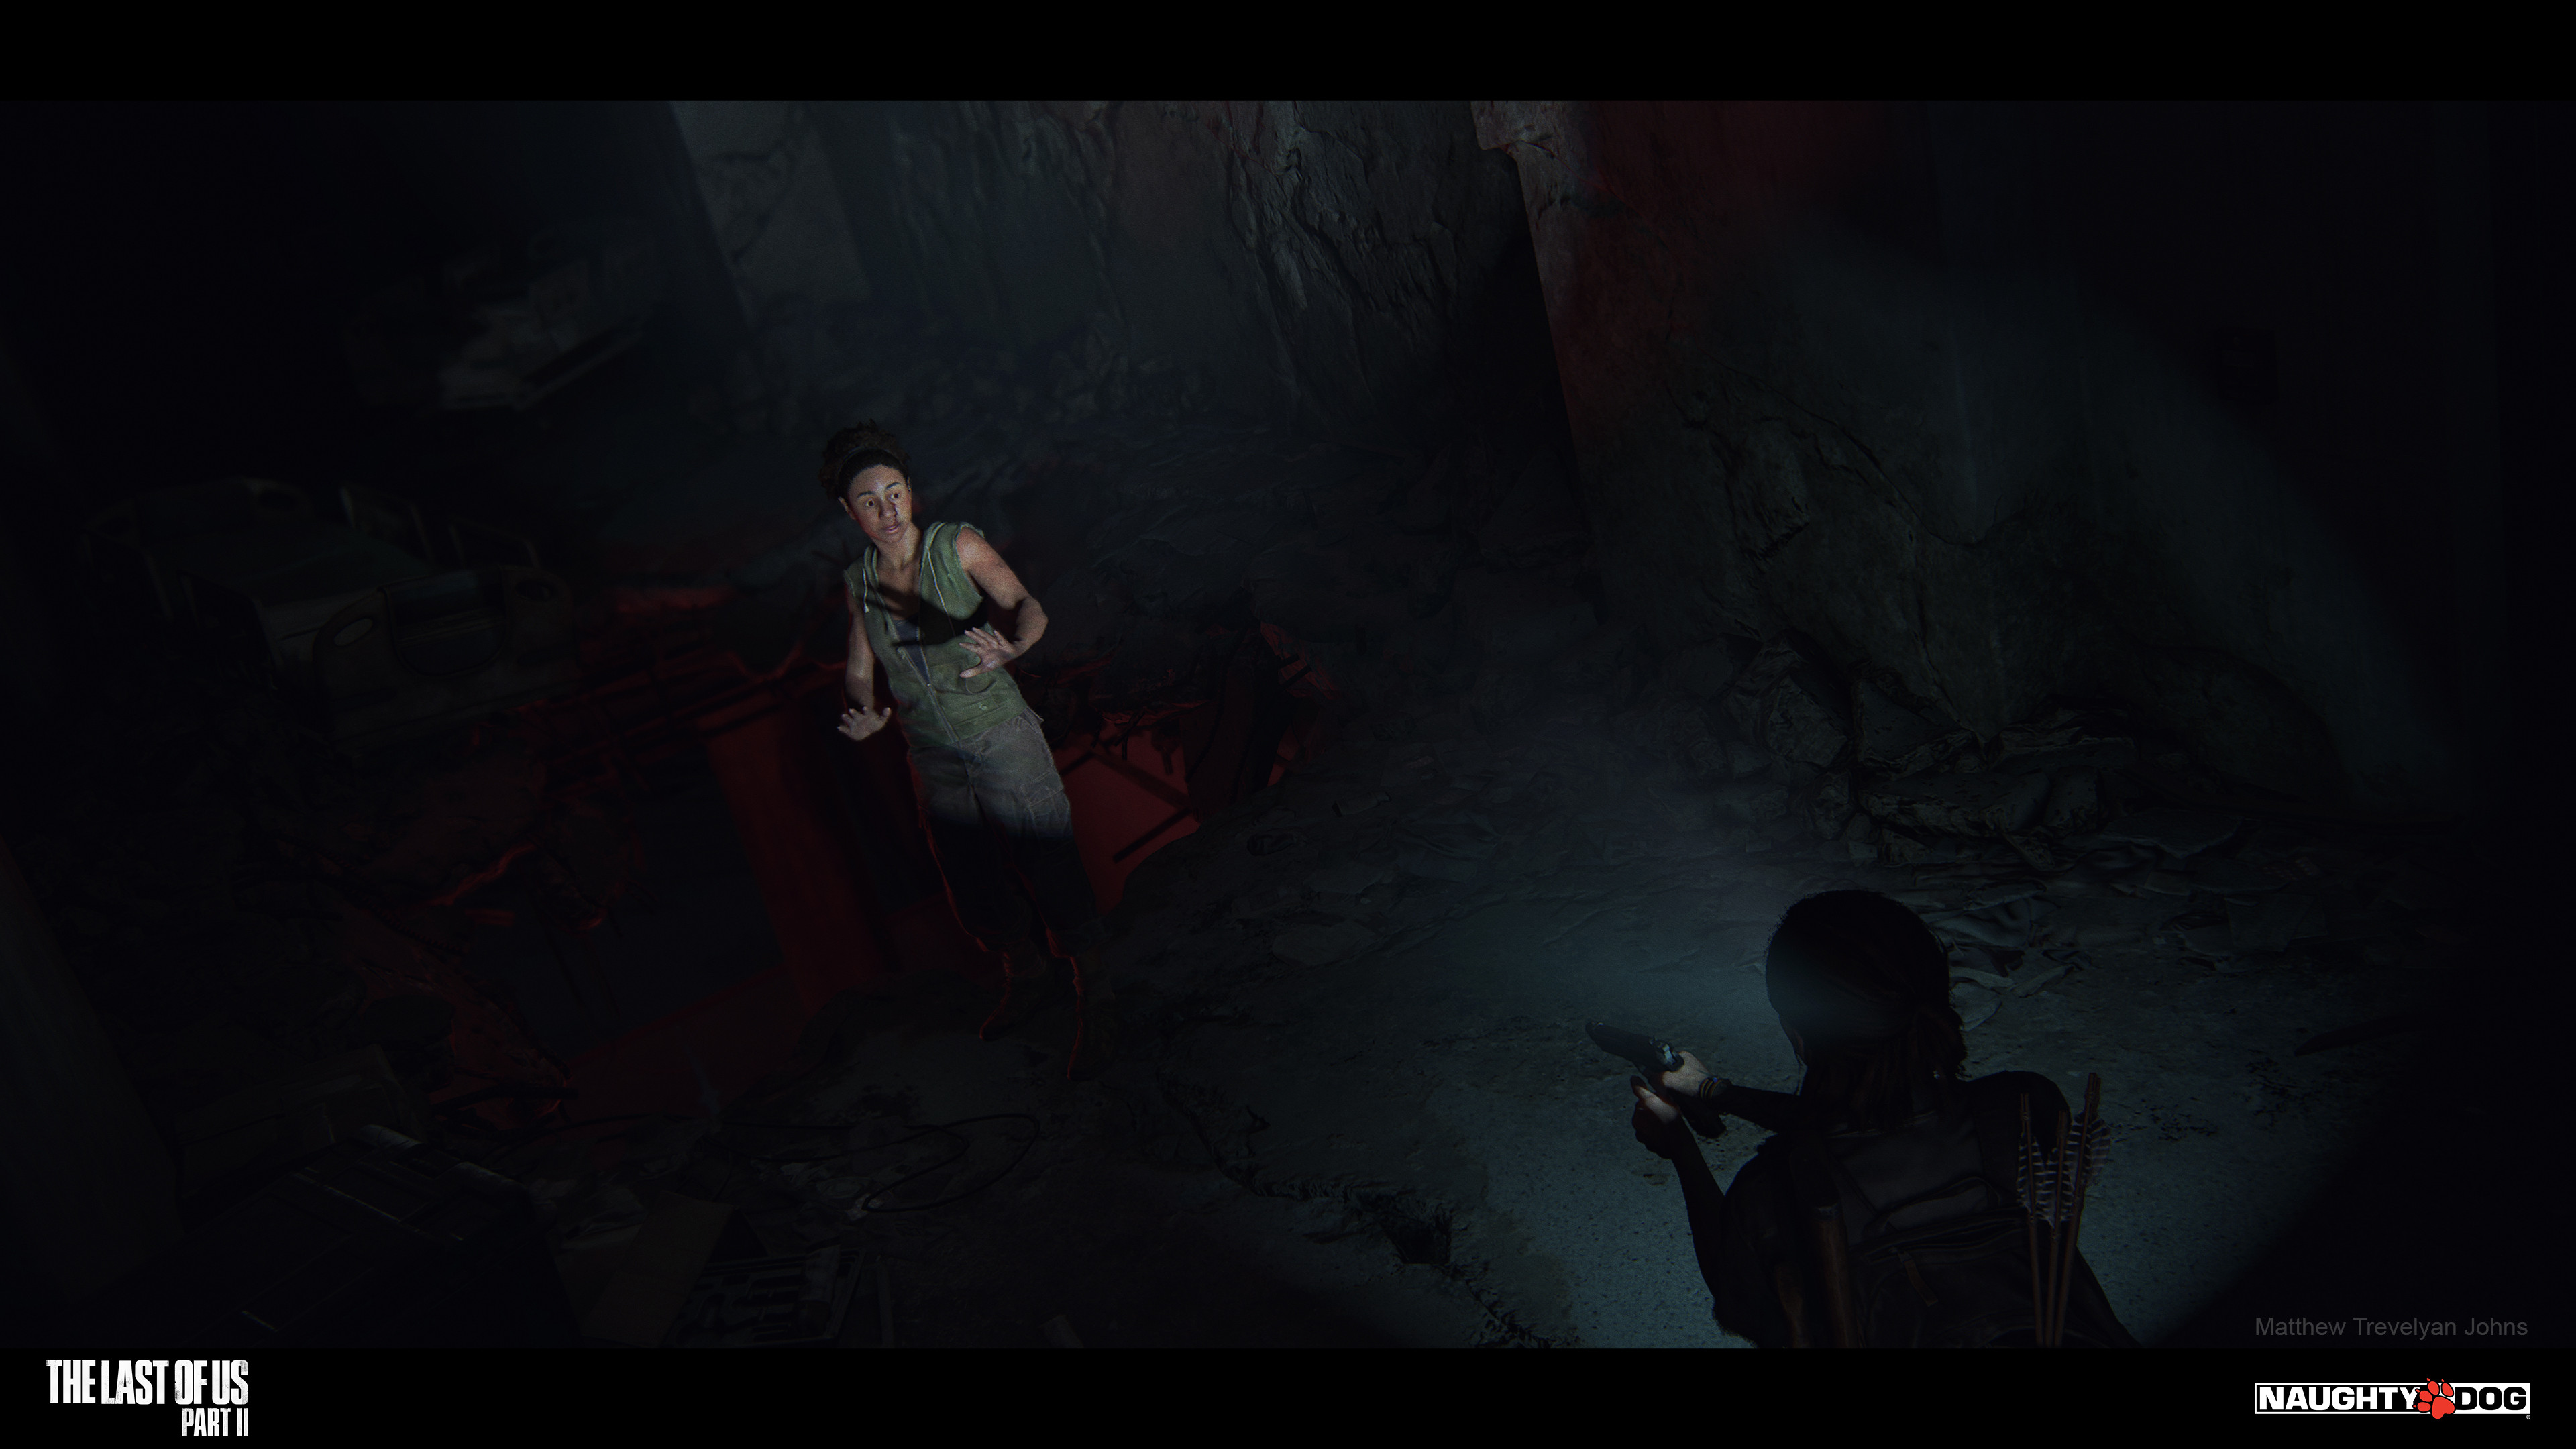 John Sweeney's vision for the red area beneath Ellie and Nora here made this drop into the unknown feel all the more perilous. That deep red lighting was my favourite of themes to work within